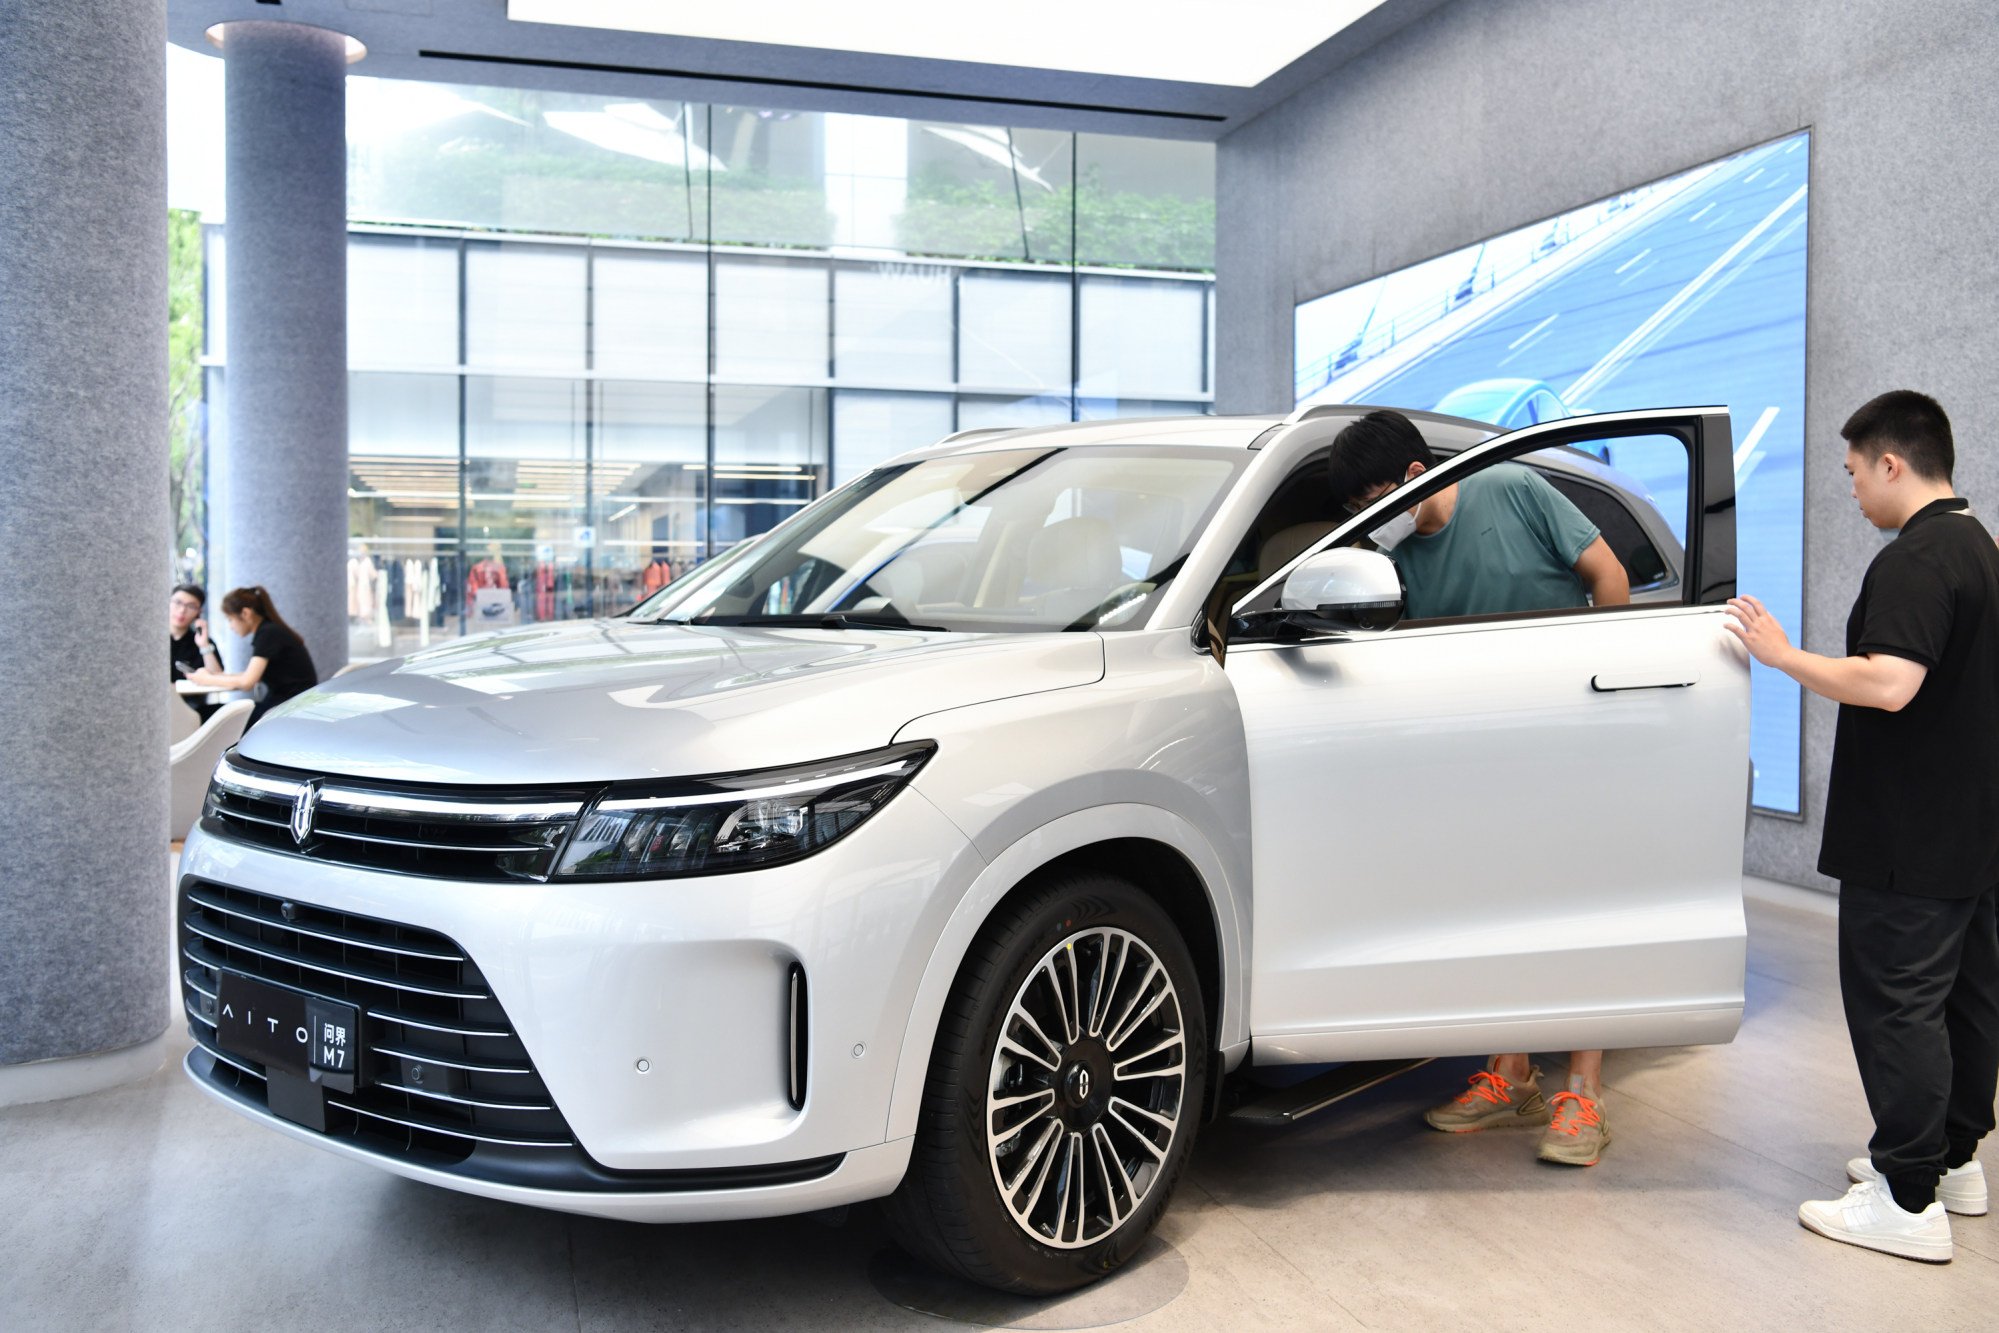 Chinese EV maker Li Auto launches multipurpose vehicle, targets wealthy  consumers seeking bigger family car